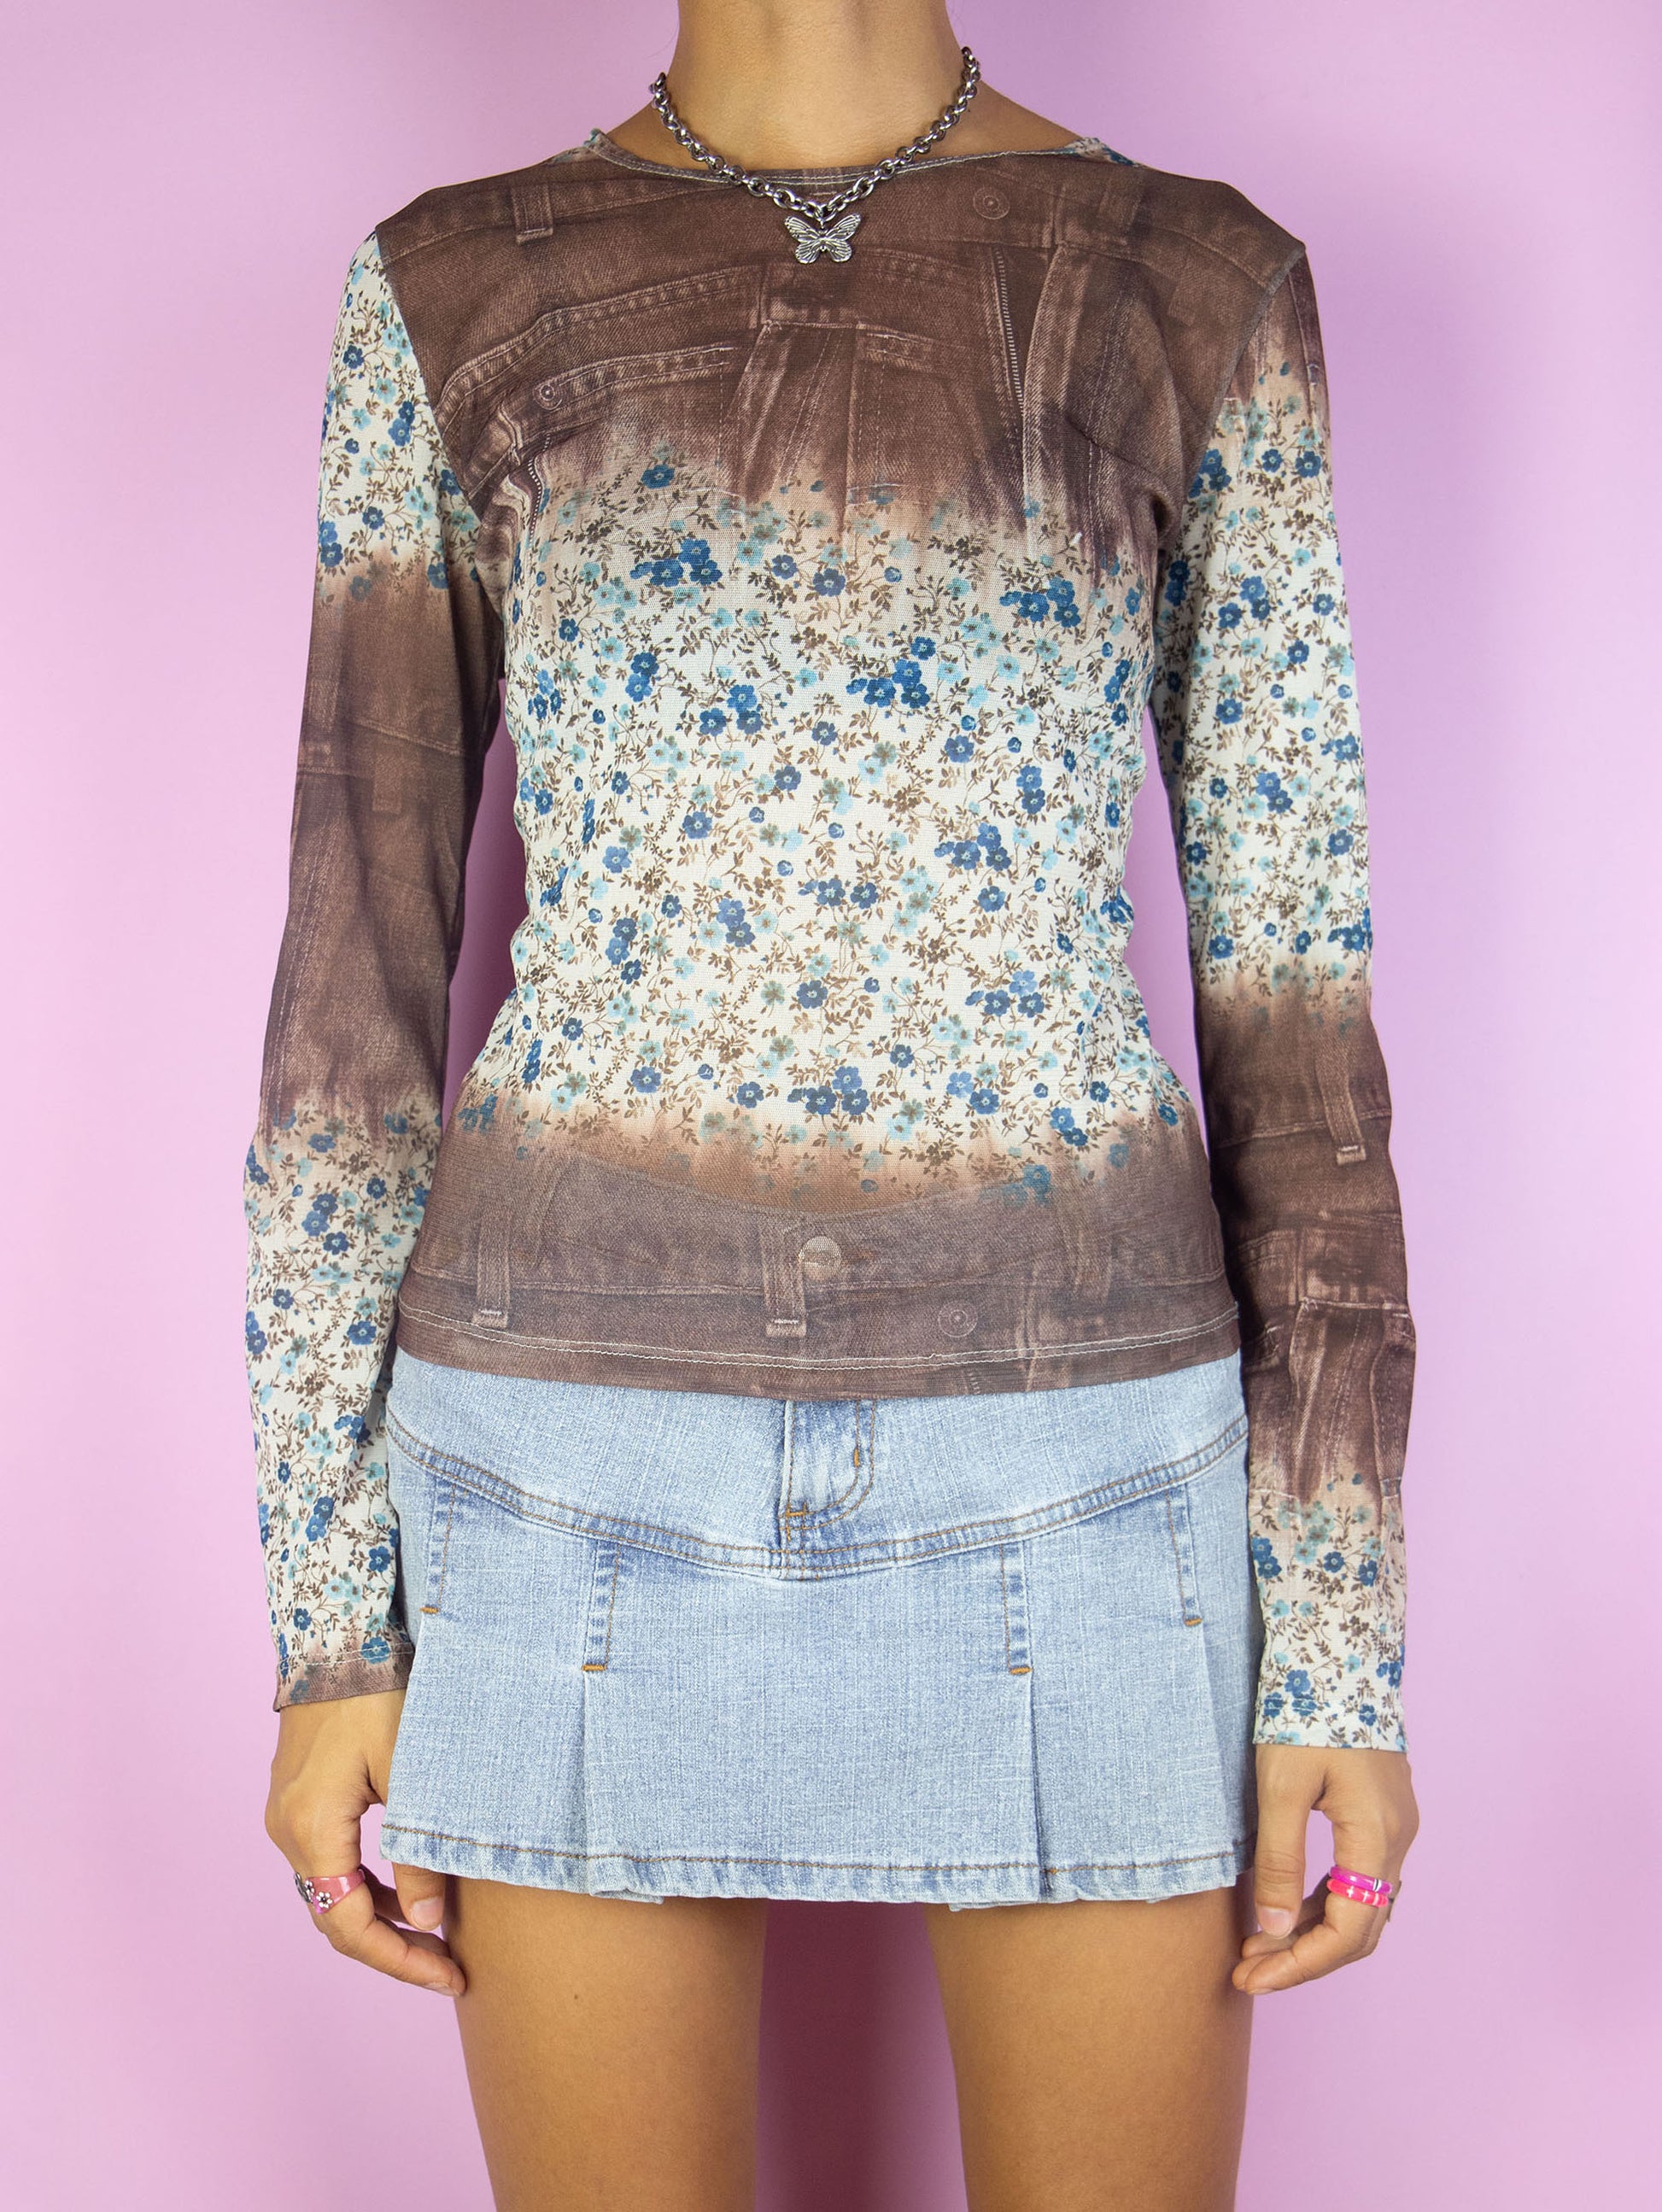 The Y2K Mesh Bell Sleeve Top is a vintage brown blue and white semi-sheer mesh floral abstract print bell sleeve shirt. Cyber fairy grunge 2000s graphic top.